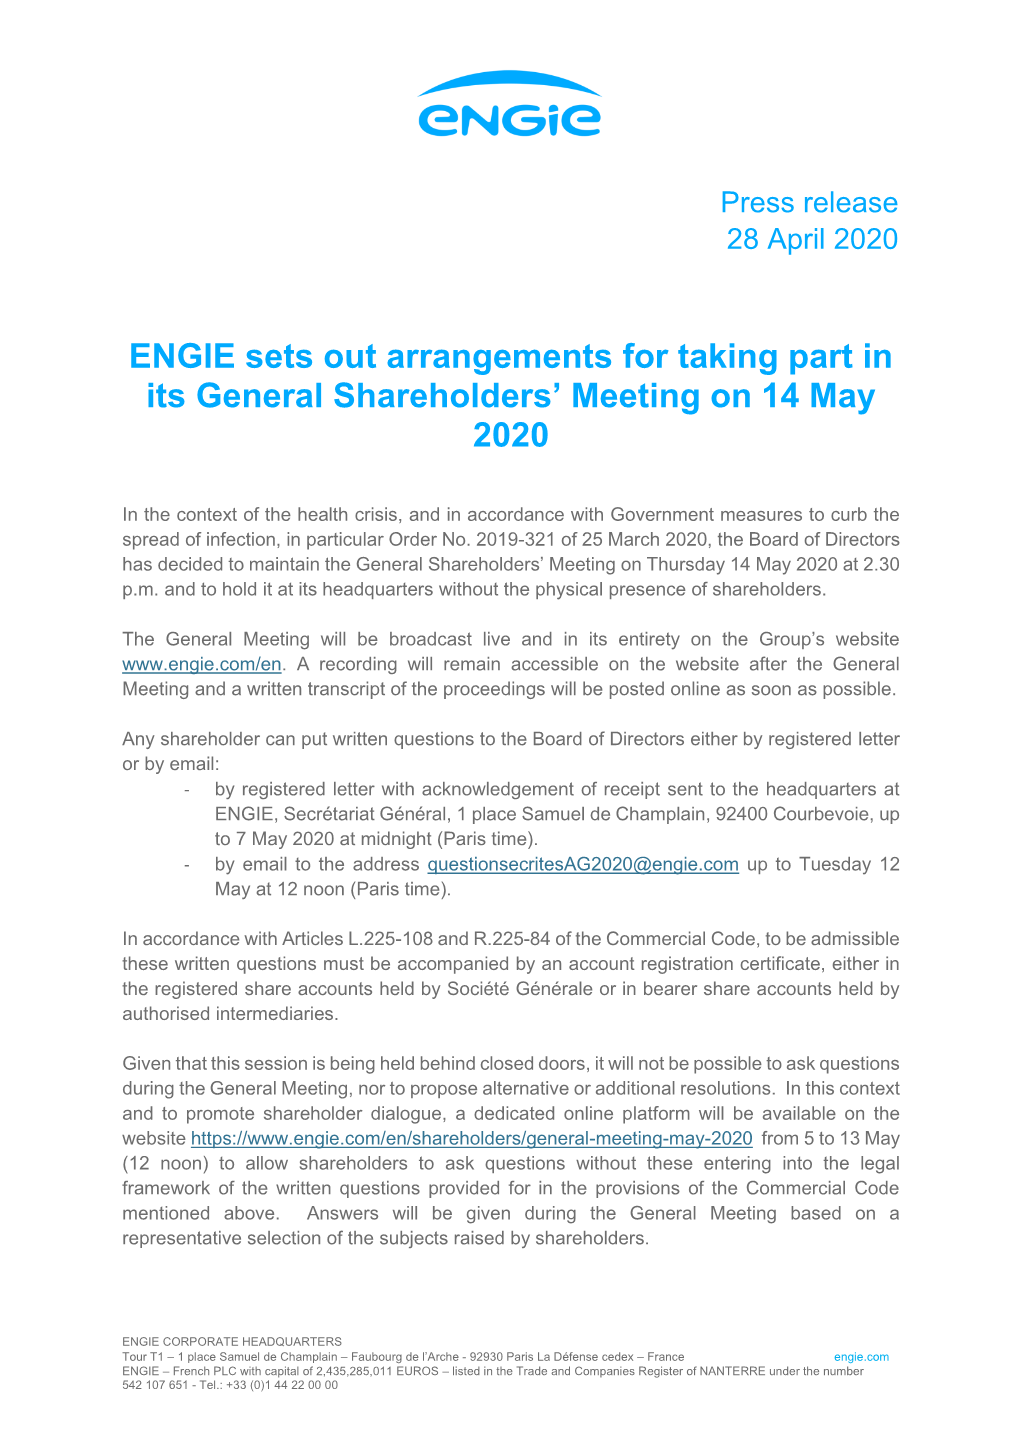 ENGIE Sets out Arrangements for Taking Part in Its General Shareholders’ Meeting on 14 May 2020